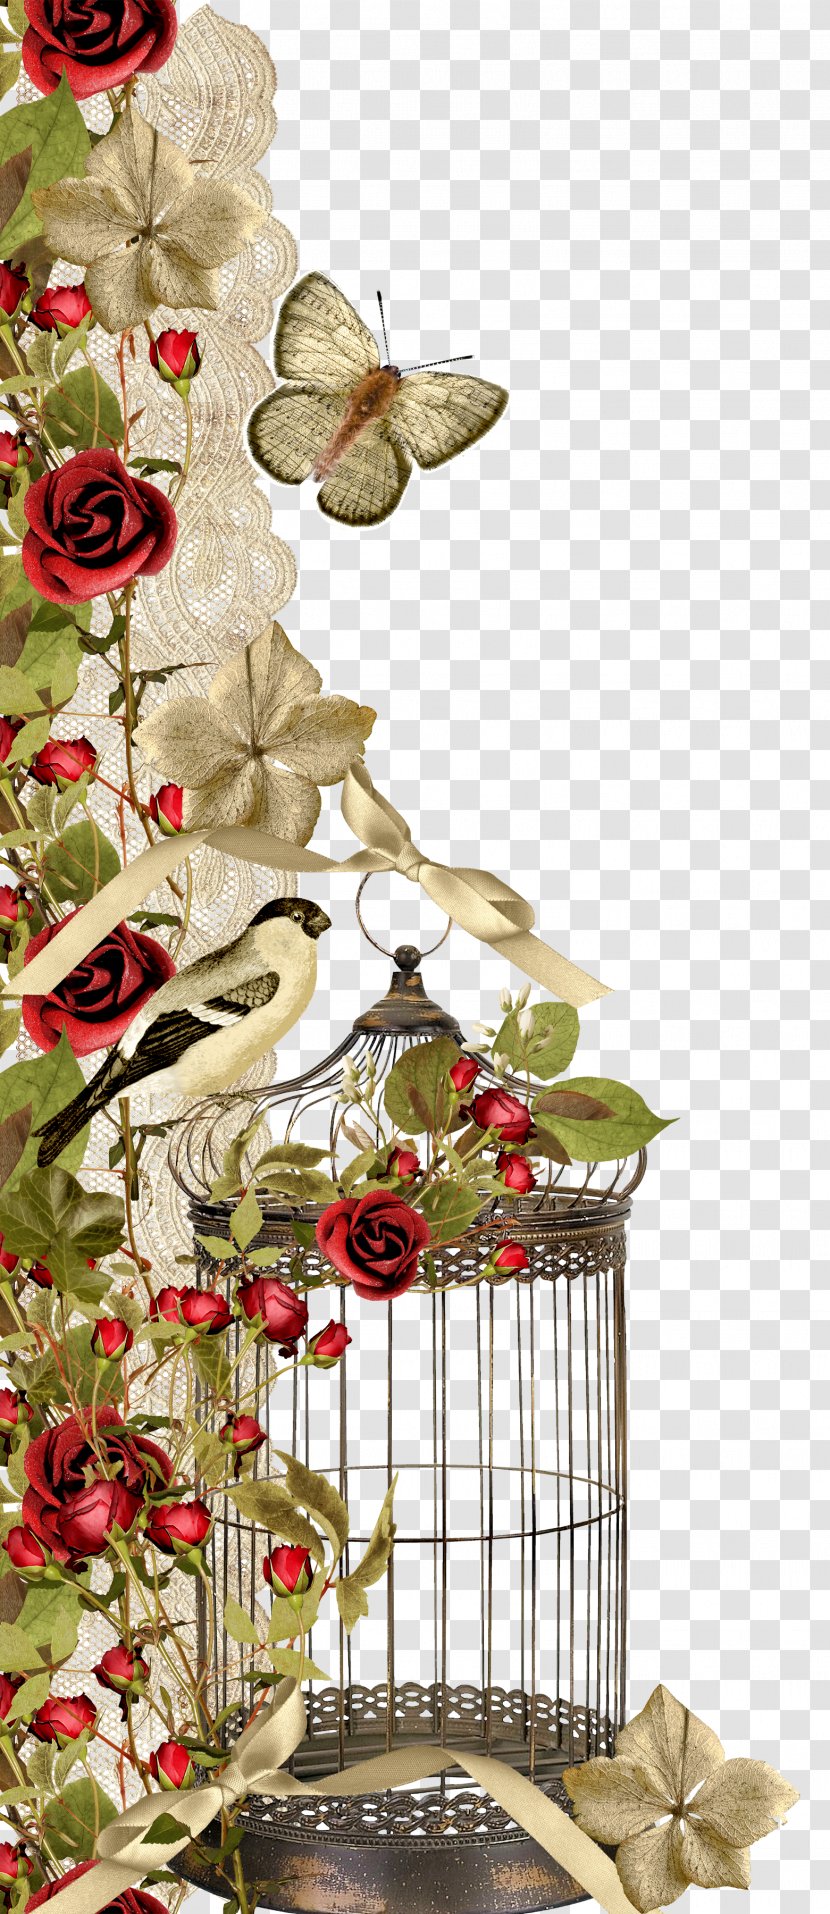 Digital Image Clip Art - Decor - Synthesis Of Roses Transparent PNG